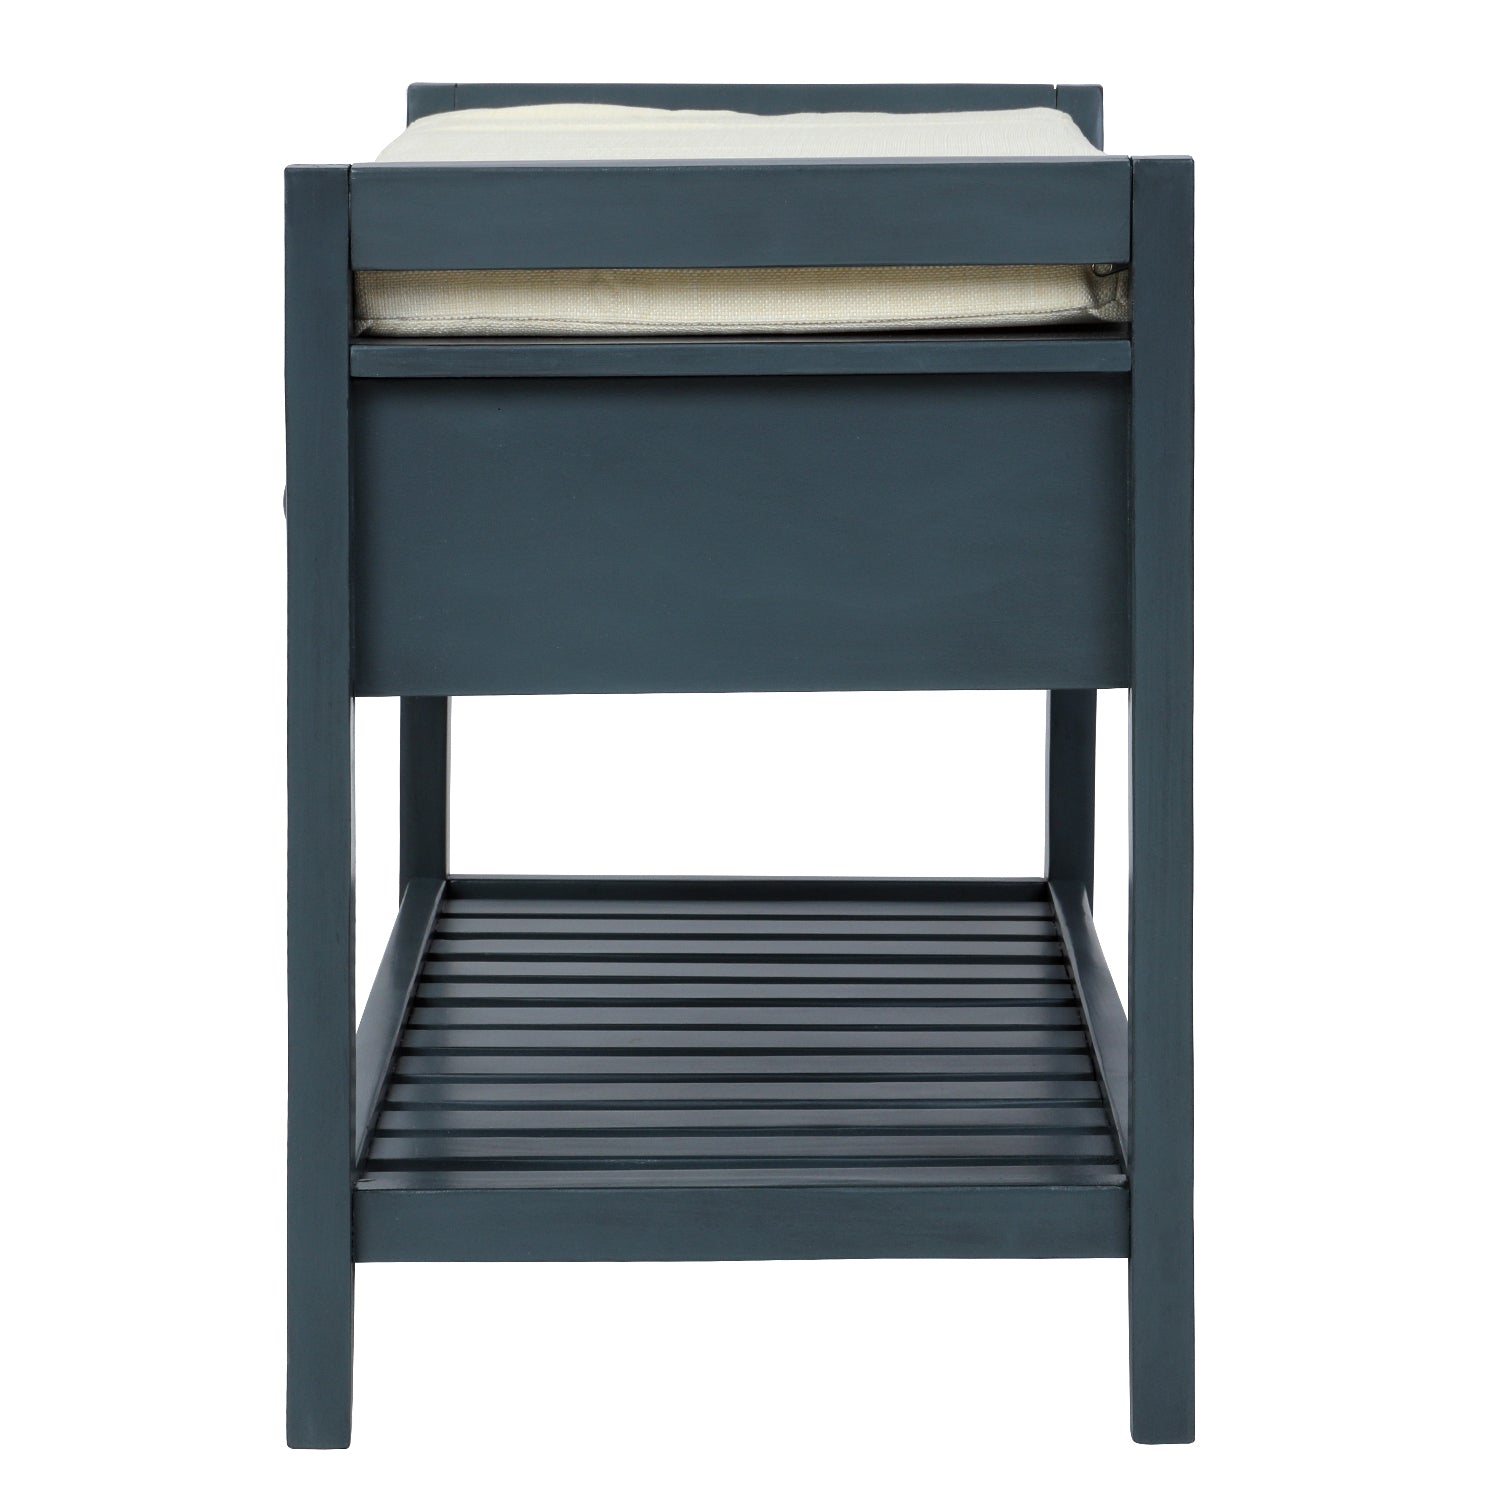 TREXM Shoe Rack with Upholstered Seat (Antique Navy)